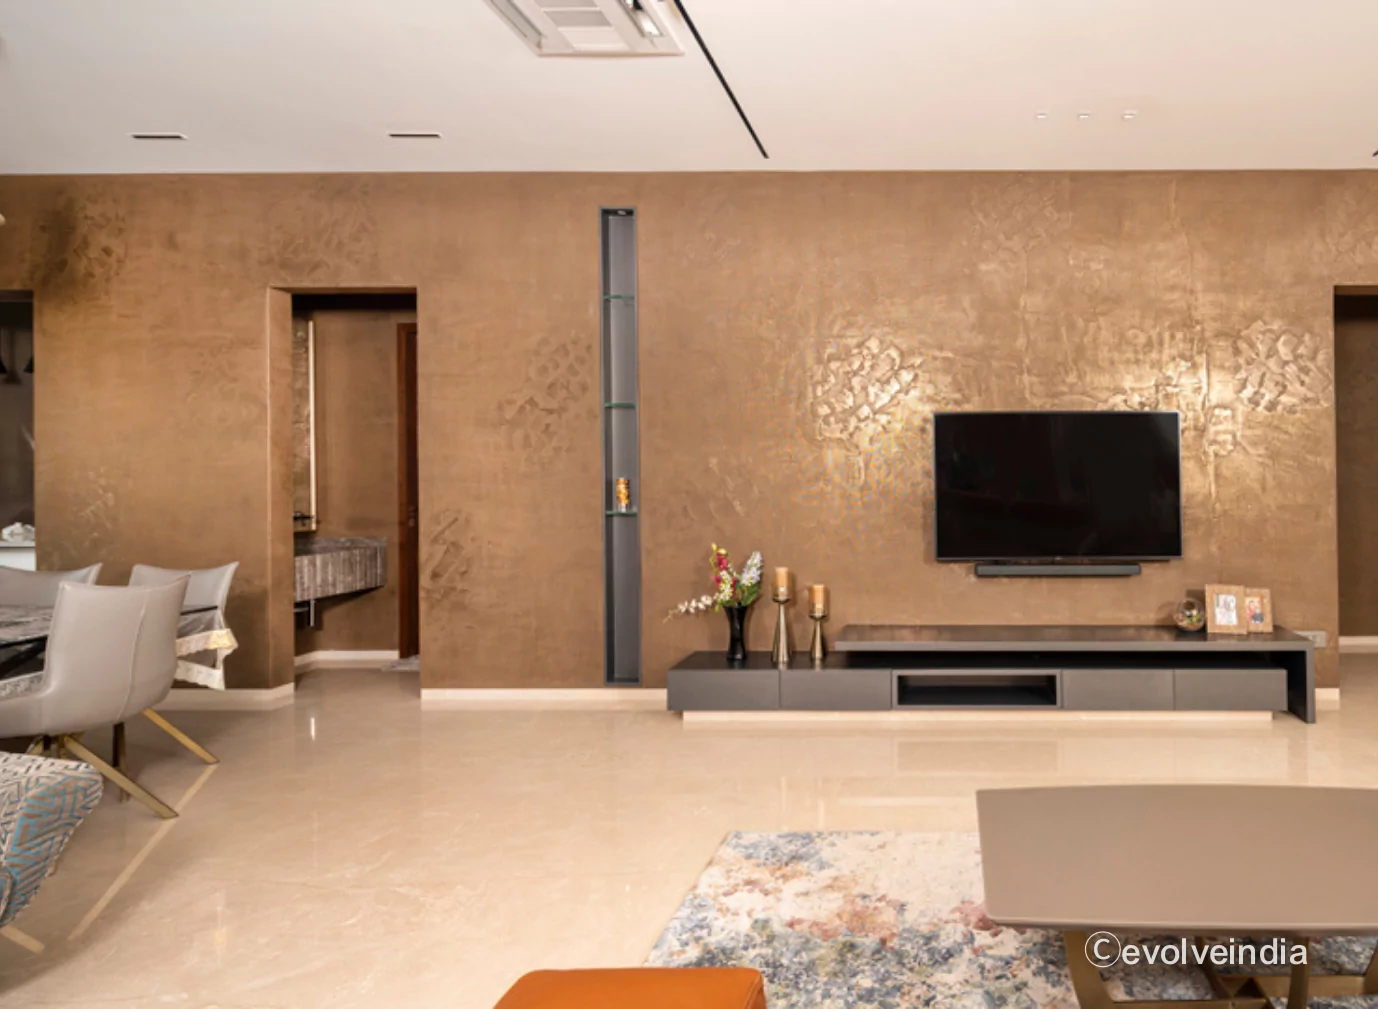 Accent wall designed using liquid metal bronze finish by Evolve India